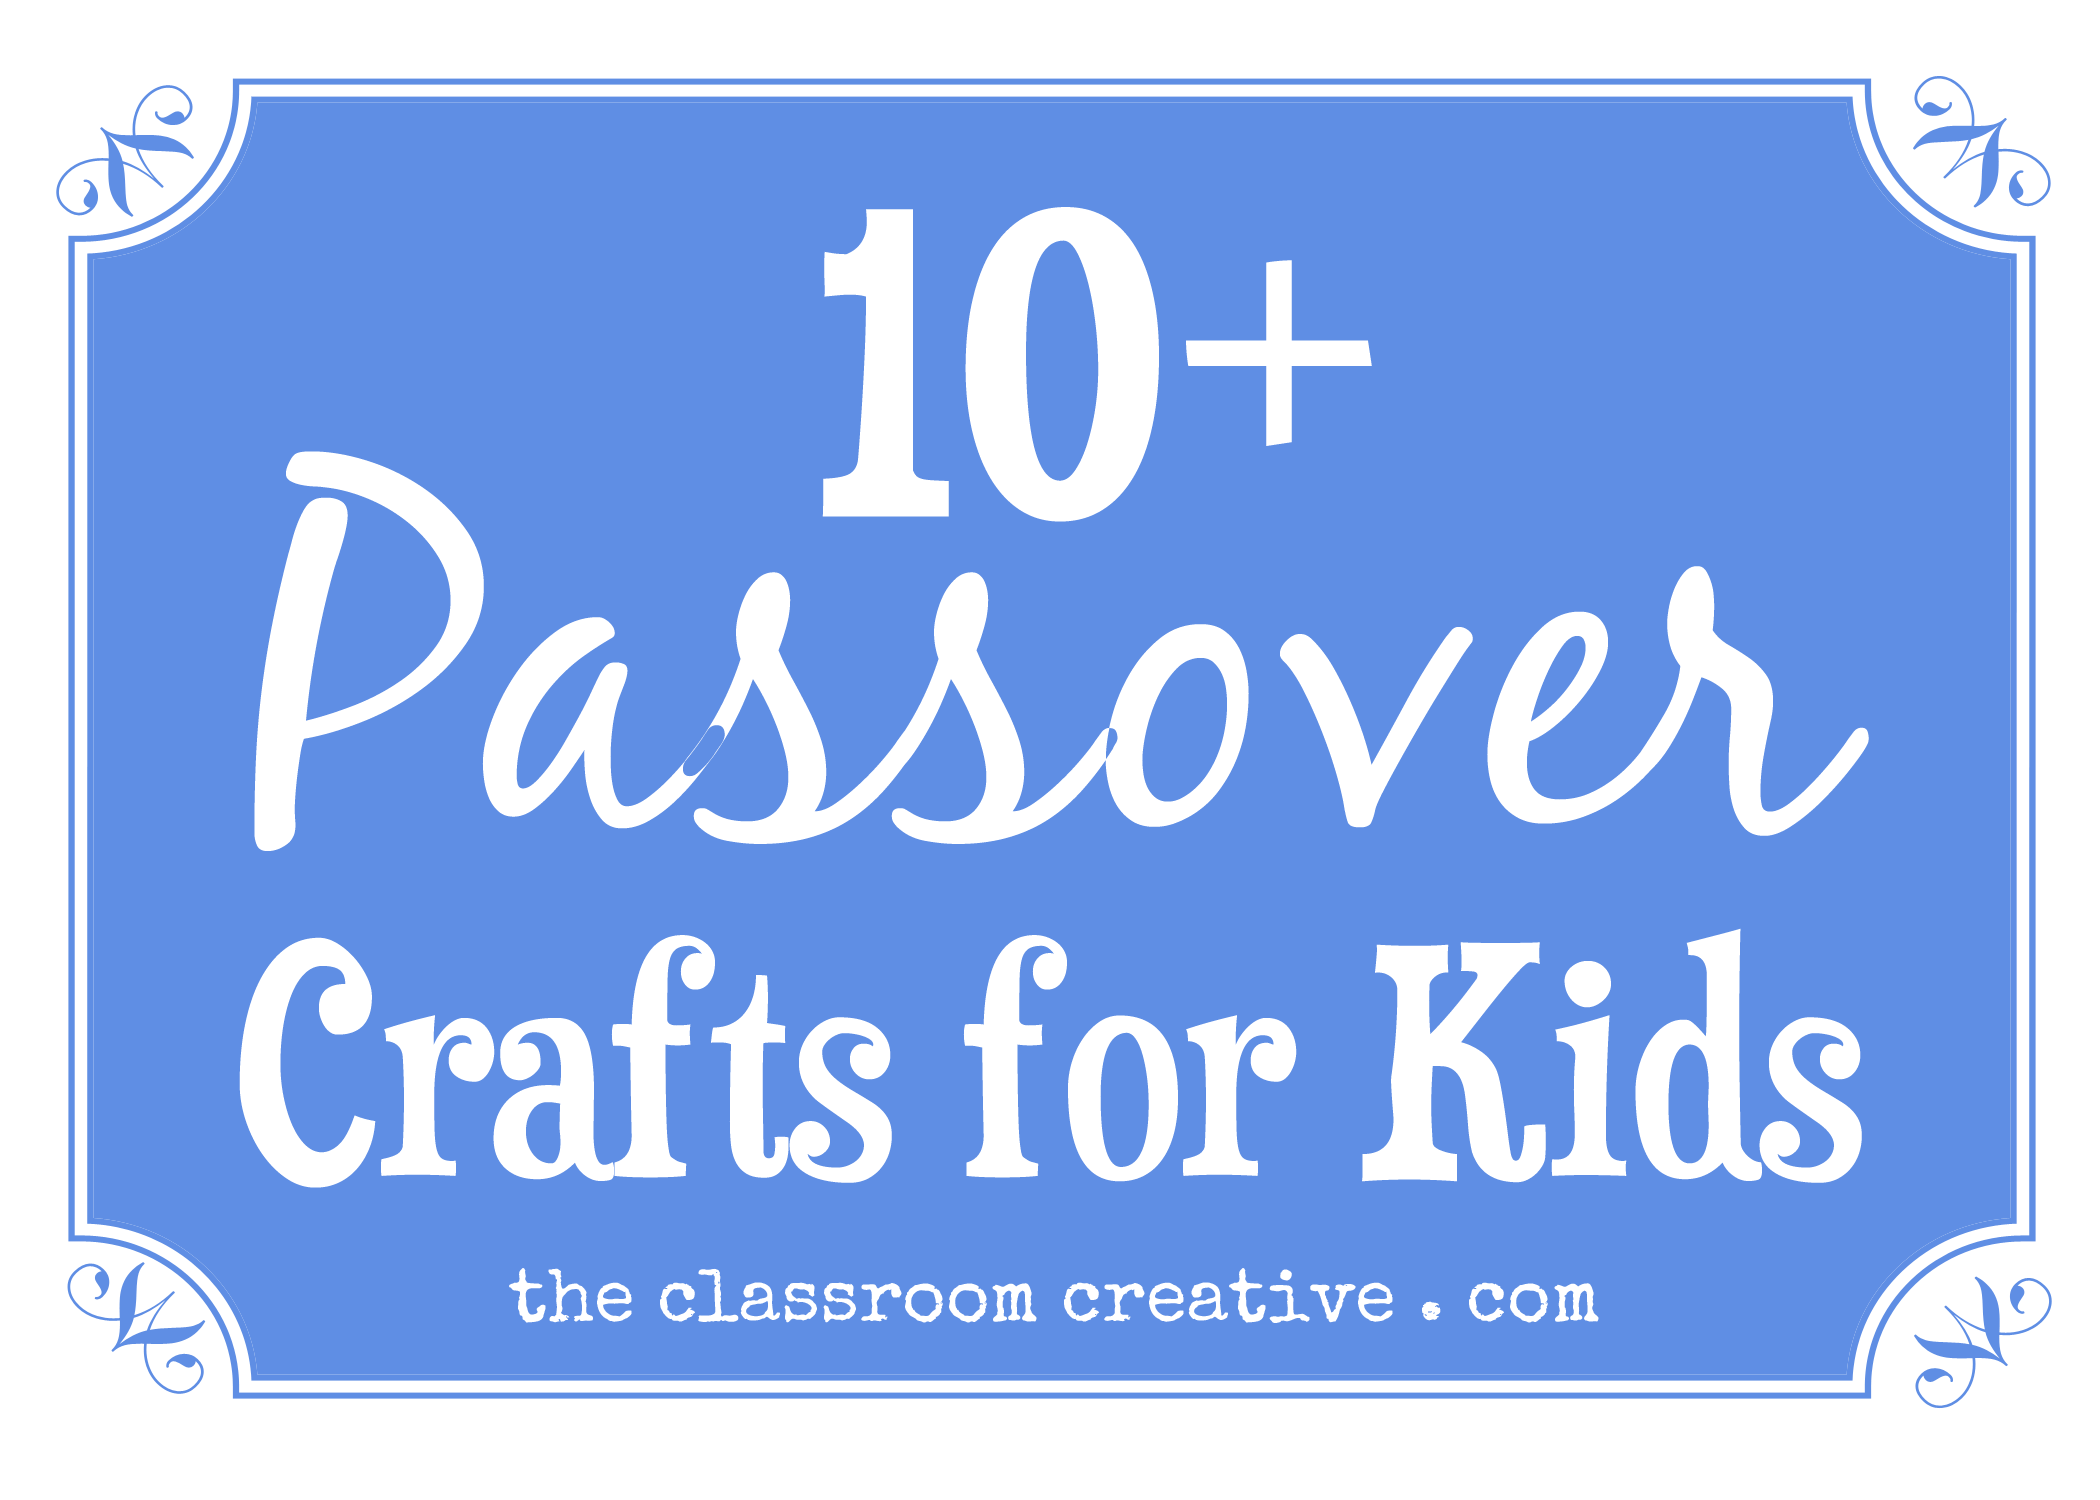 Clipart door passover. Crafts and ideas for